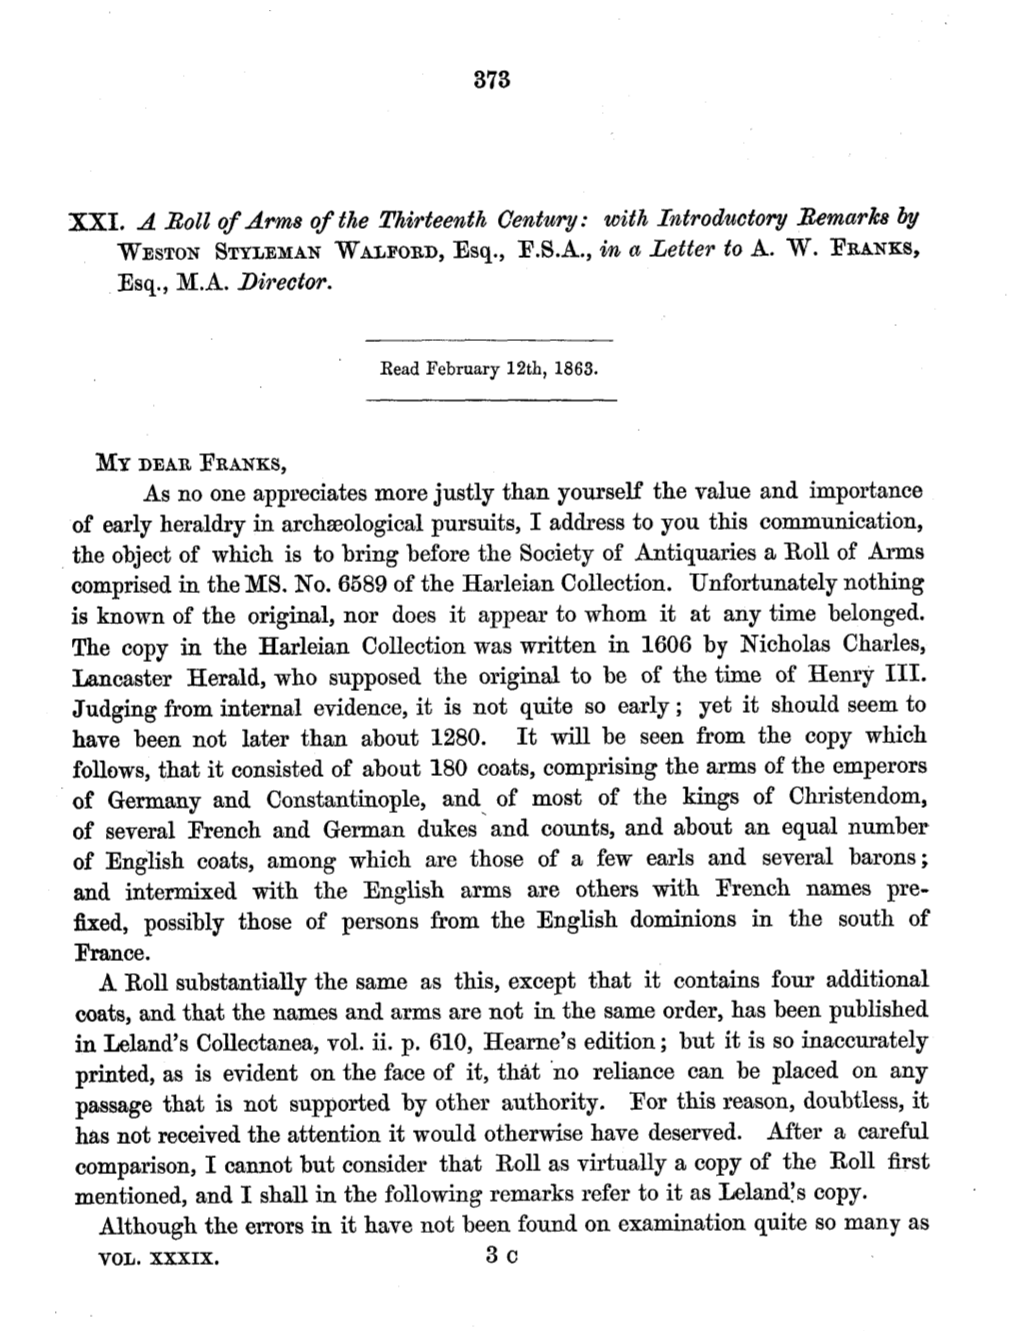 XXI. a Boll of Arms of the Thirteenth Century: with Introductory Remarks by WBSTON STYLEMAN WATFORD, Esq., F.S.A., in a Letter to A